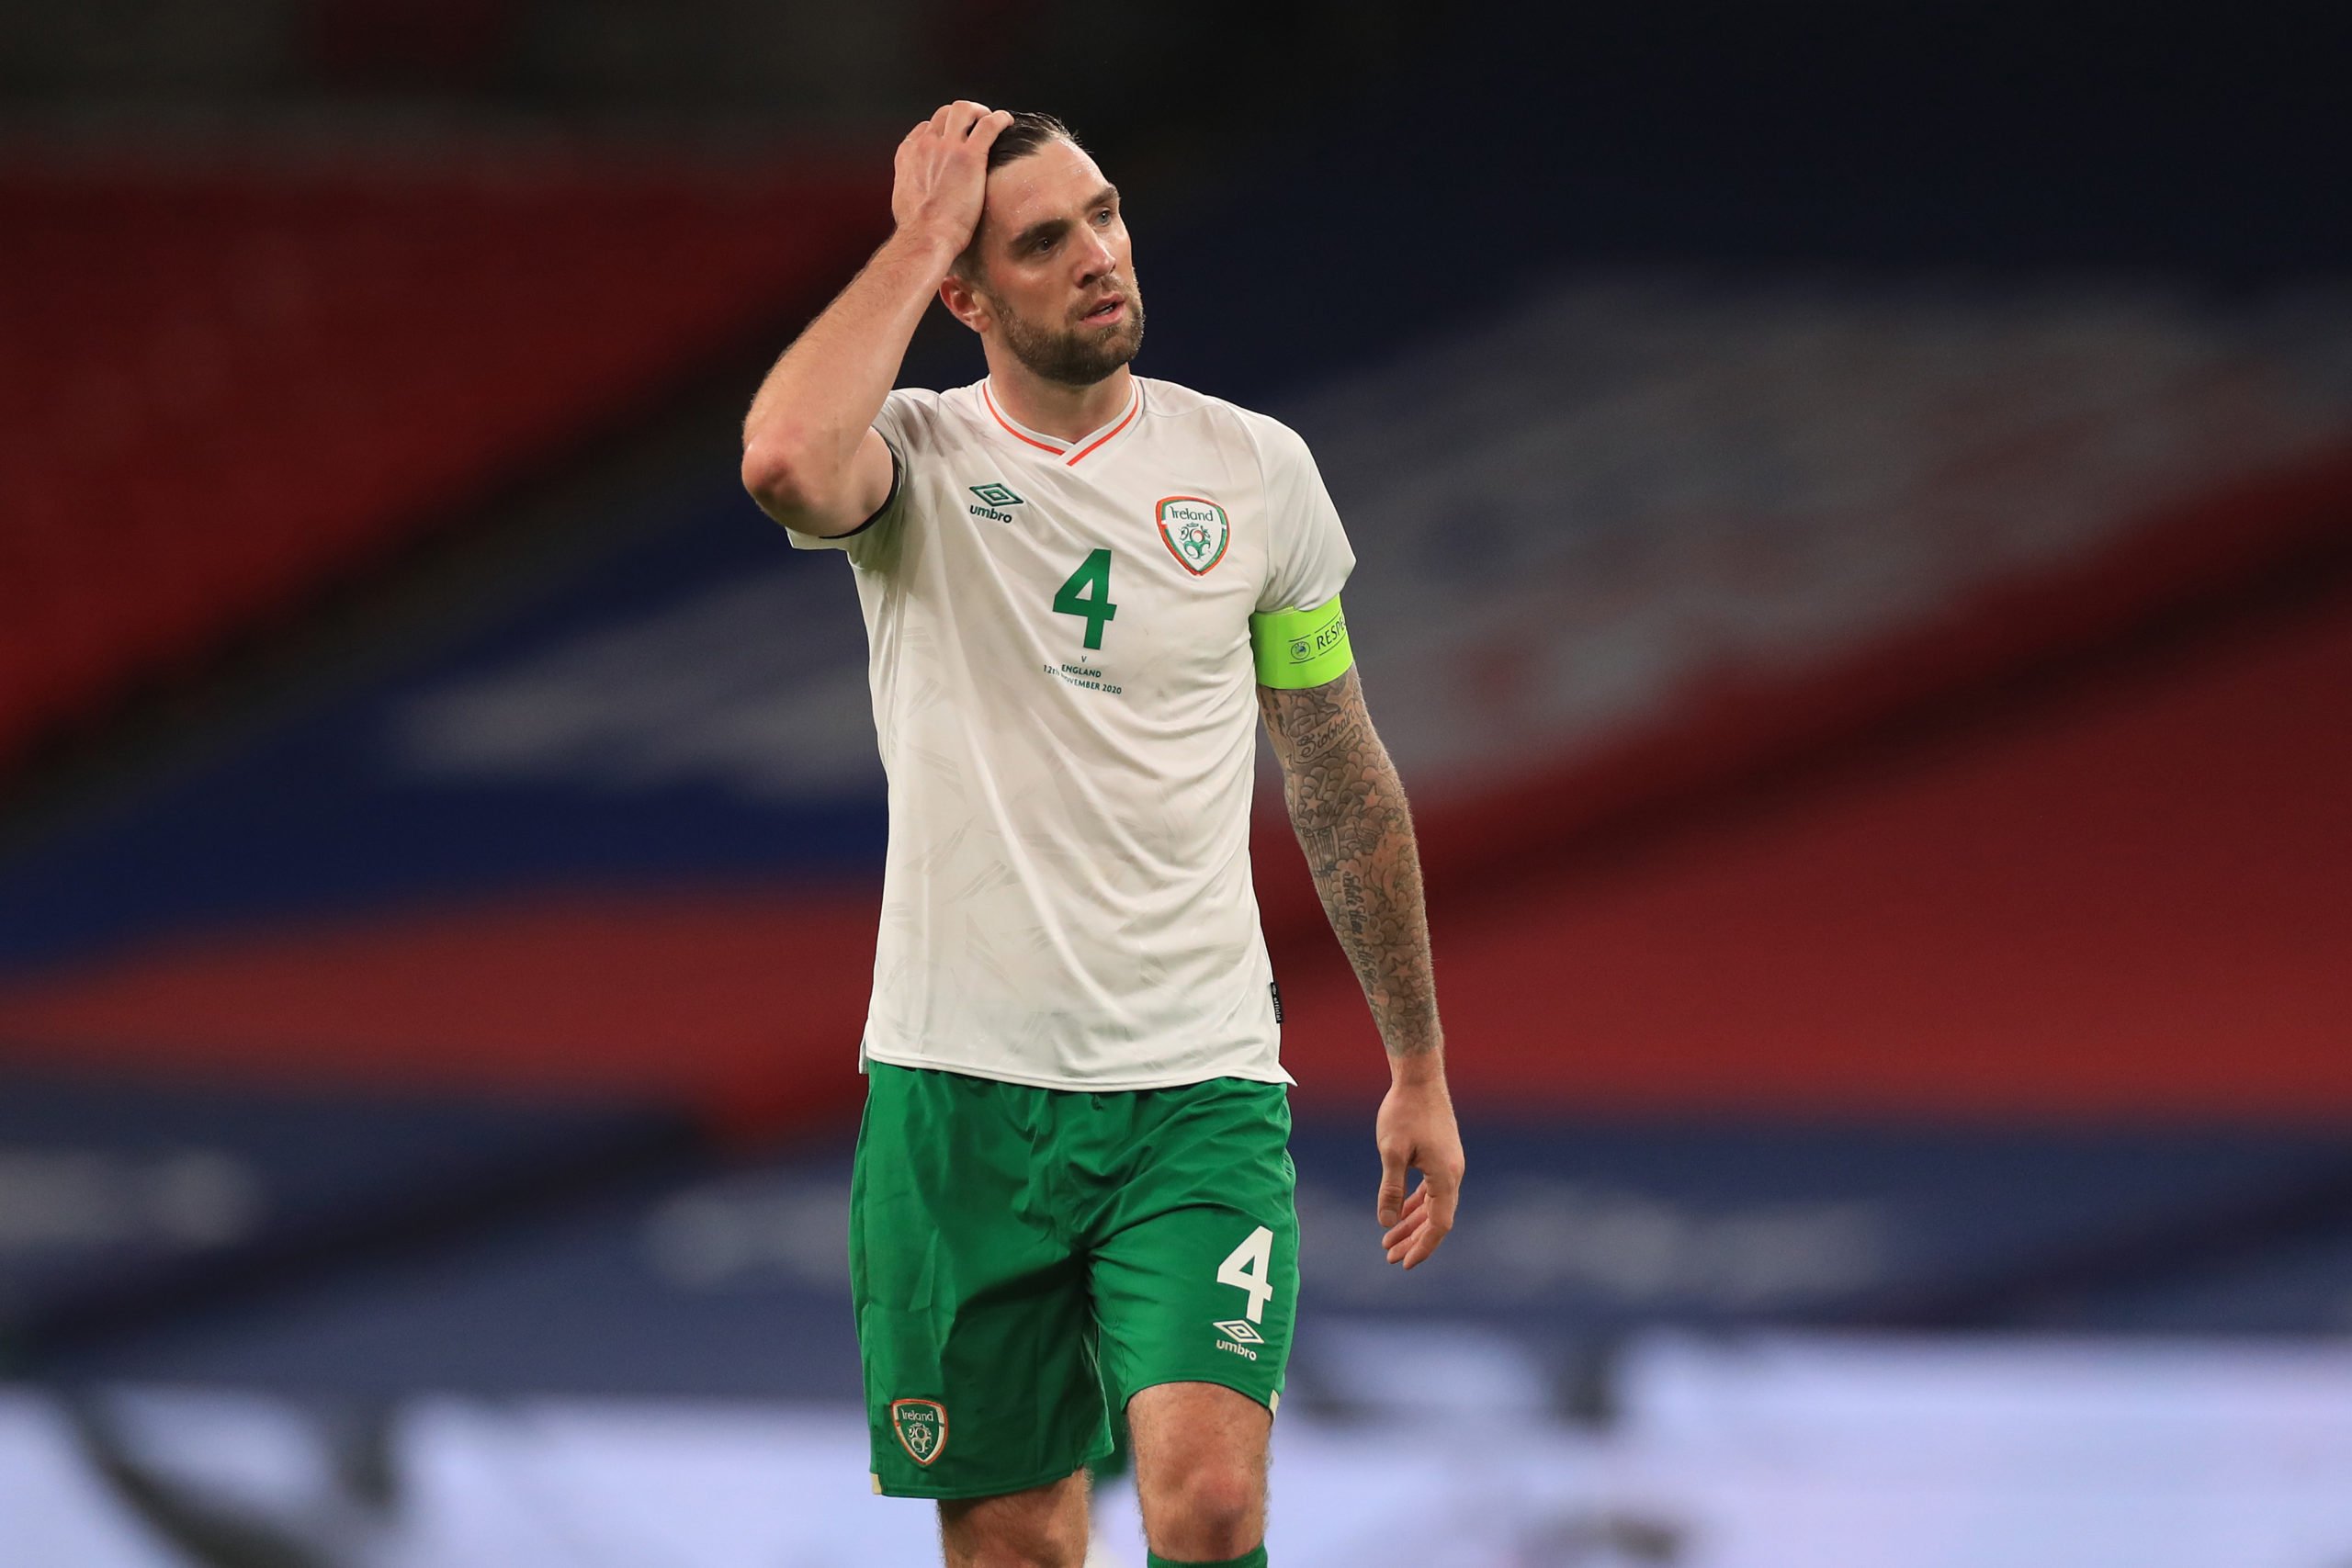 Celtic centre-back Shane Duffy has had a tough time of it